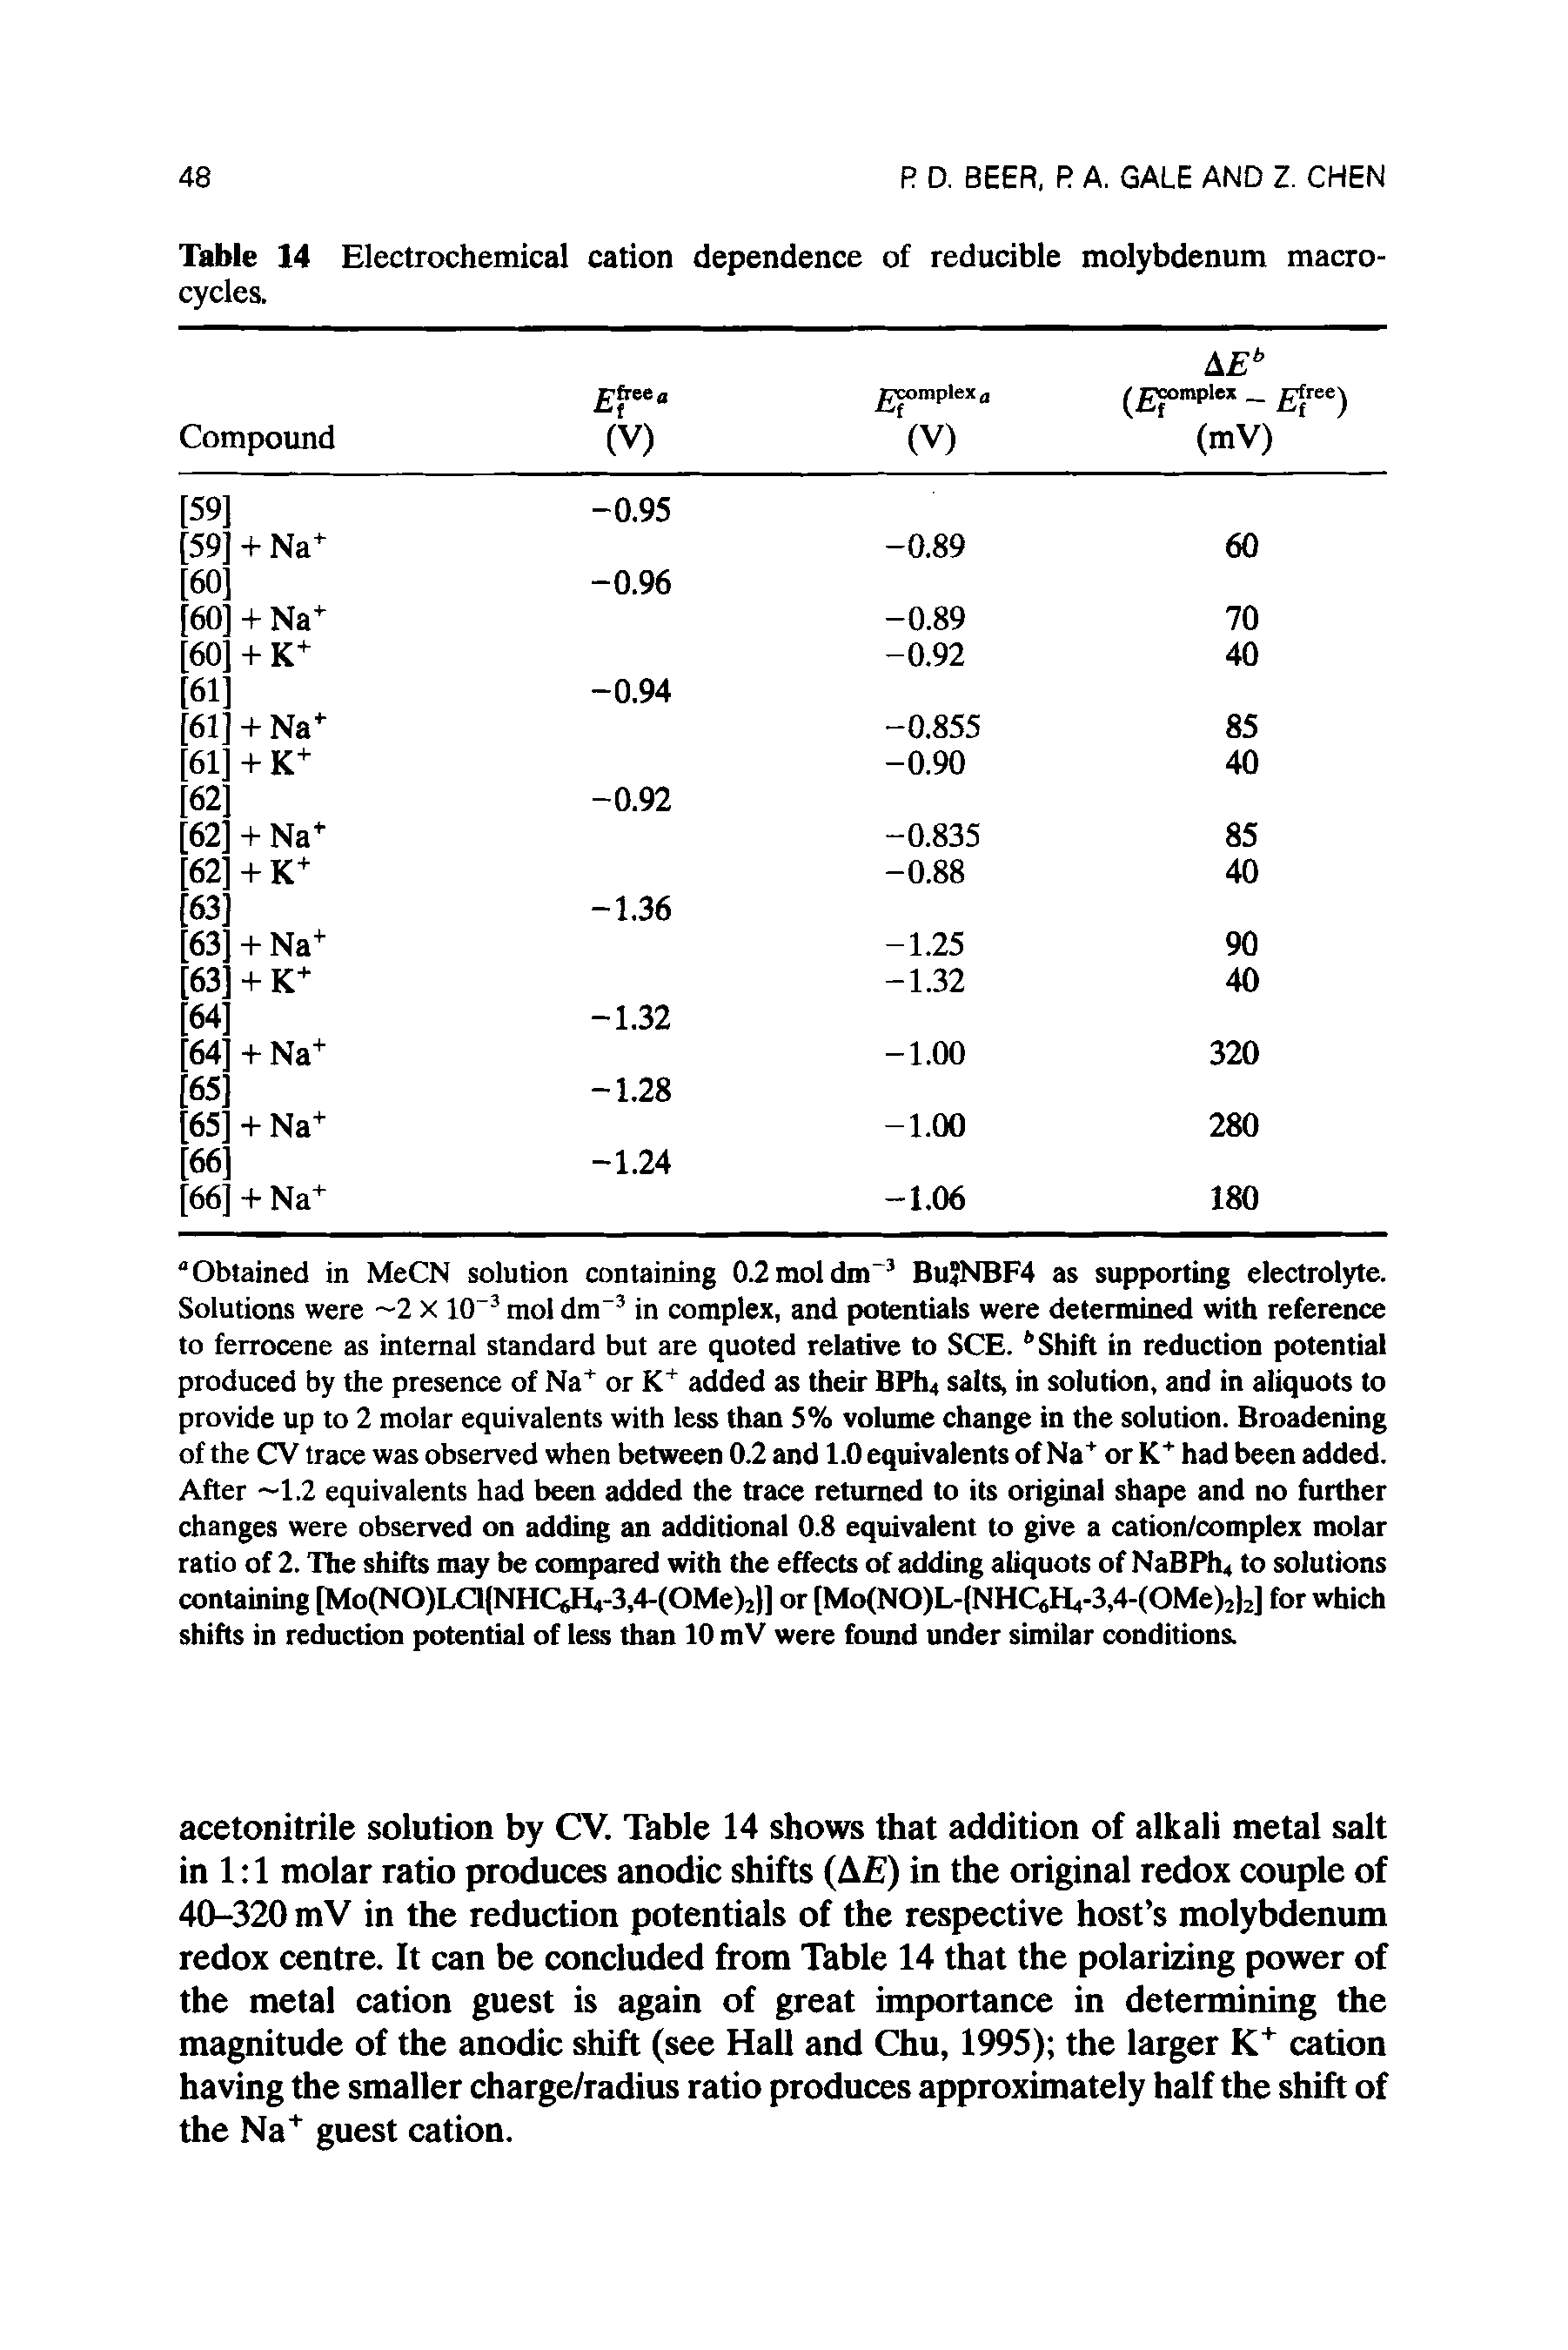 Table 14 Electrochemical cation dependence of reducible molybdenum macrocycles.